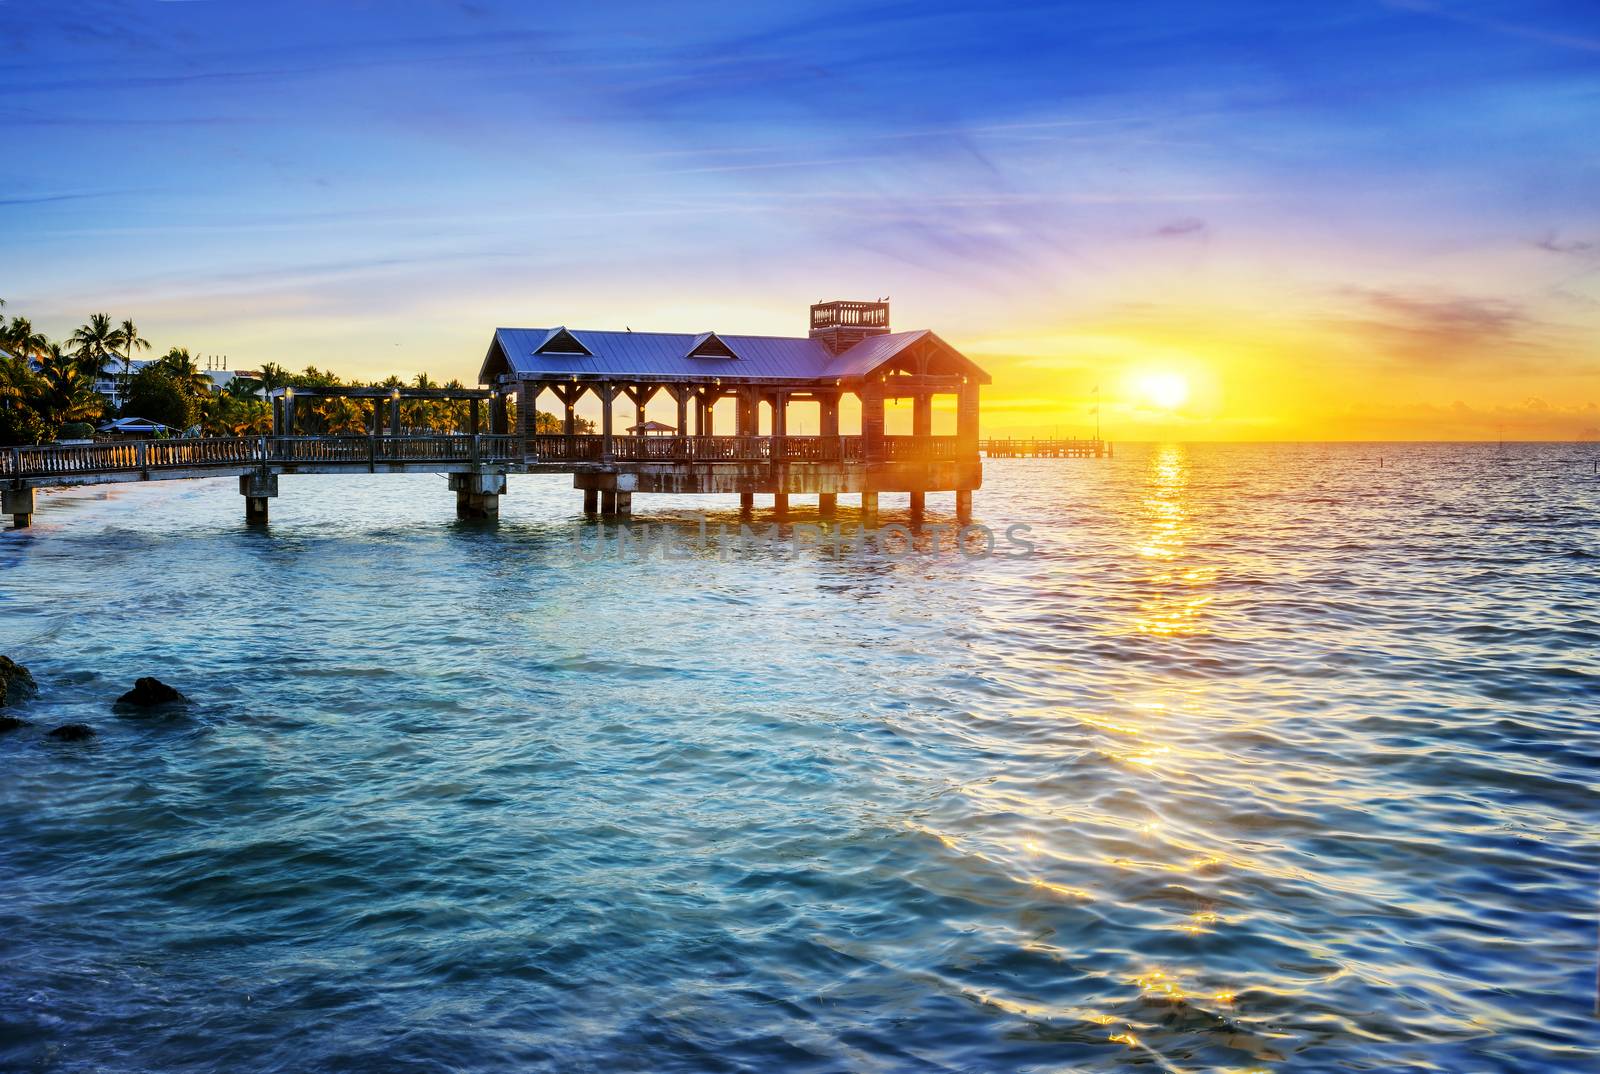 Pier at the beach in Key West, Florida USA 